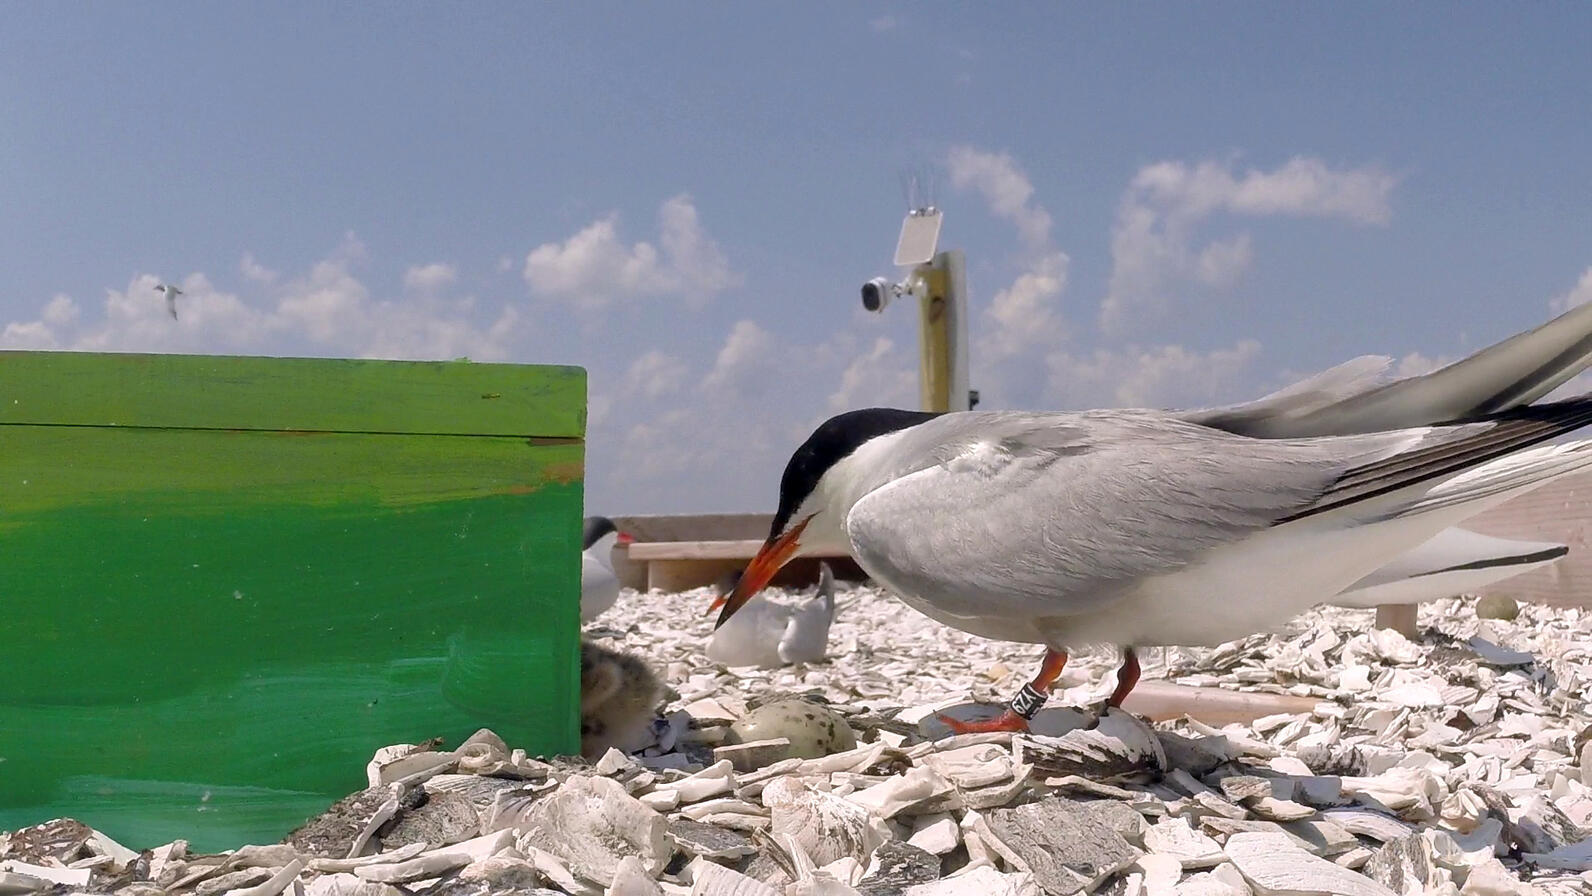 A Common Tern tends to its chick on rafts that were built to restore nesting habitat in Maryland’s coastal bays.